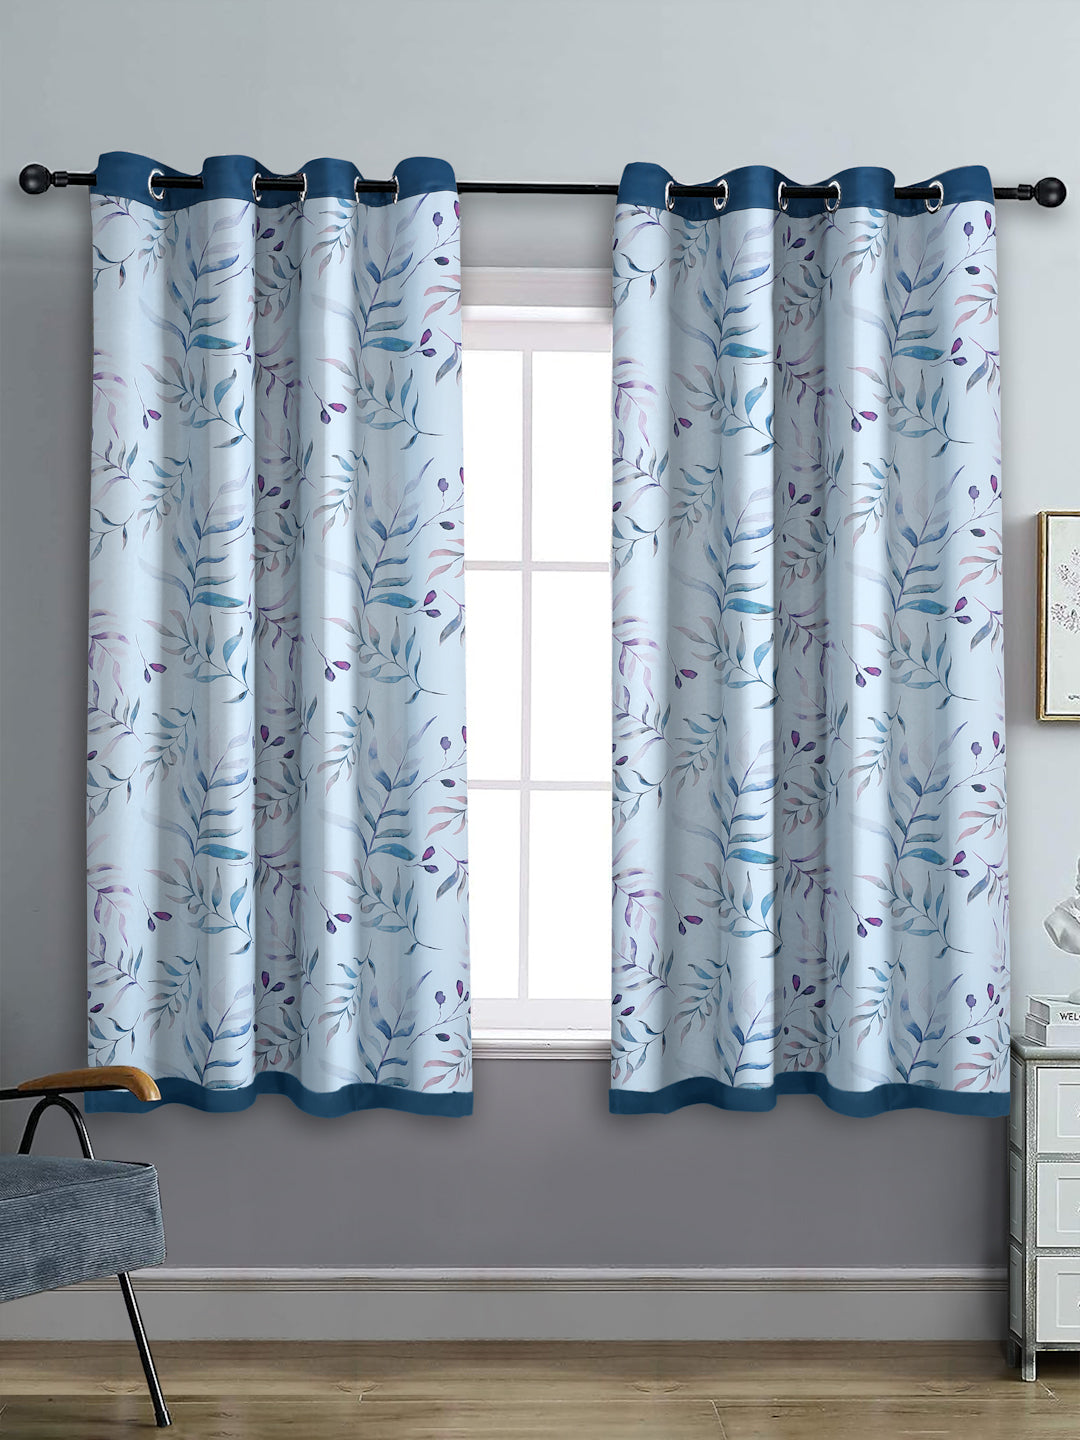 Reversible Floral Printed Blackout Window Curtains Set of 2- Navy Blue